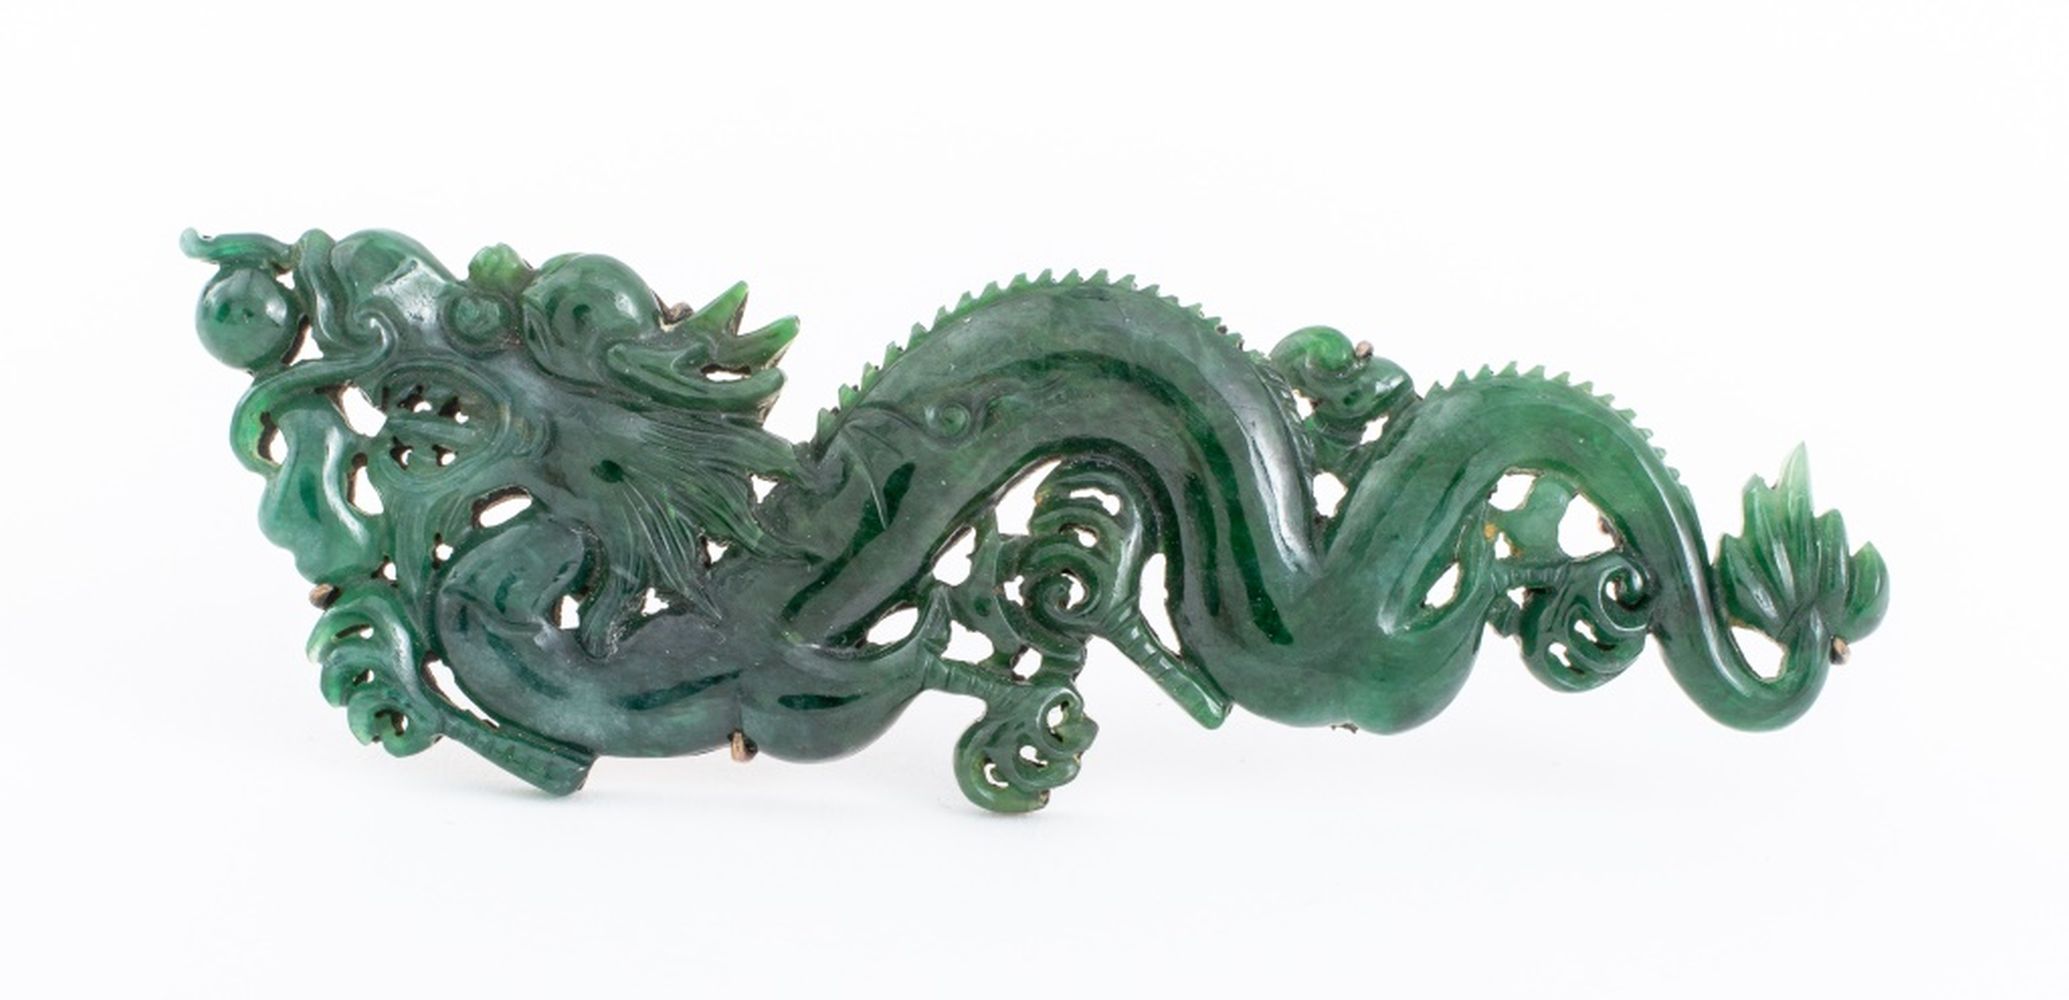 ANTIQUE CHINESE CARVED JADE DRAGON 2fc8c3